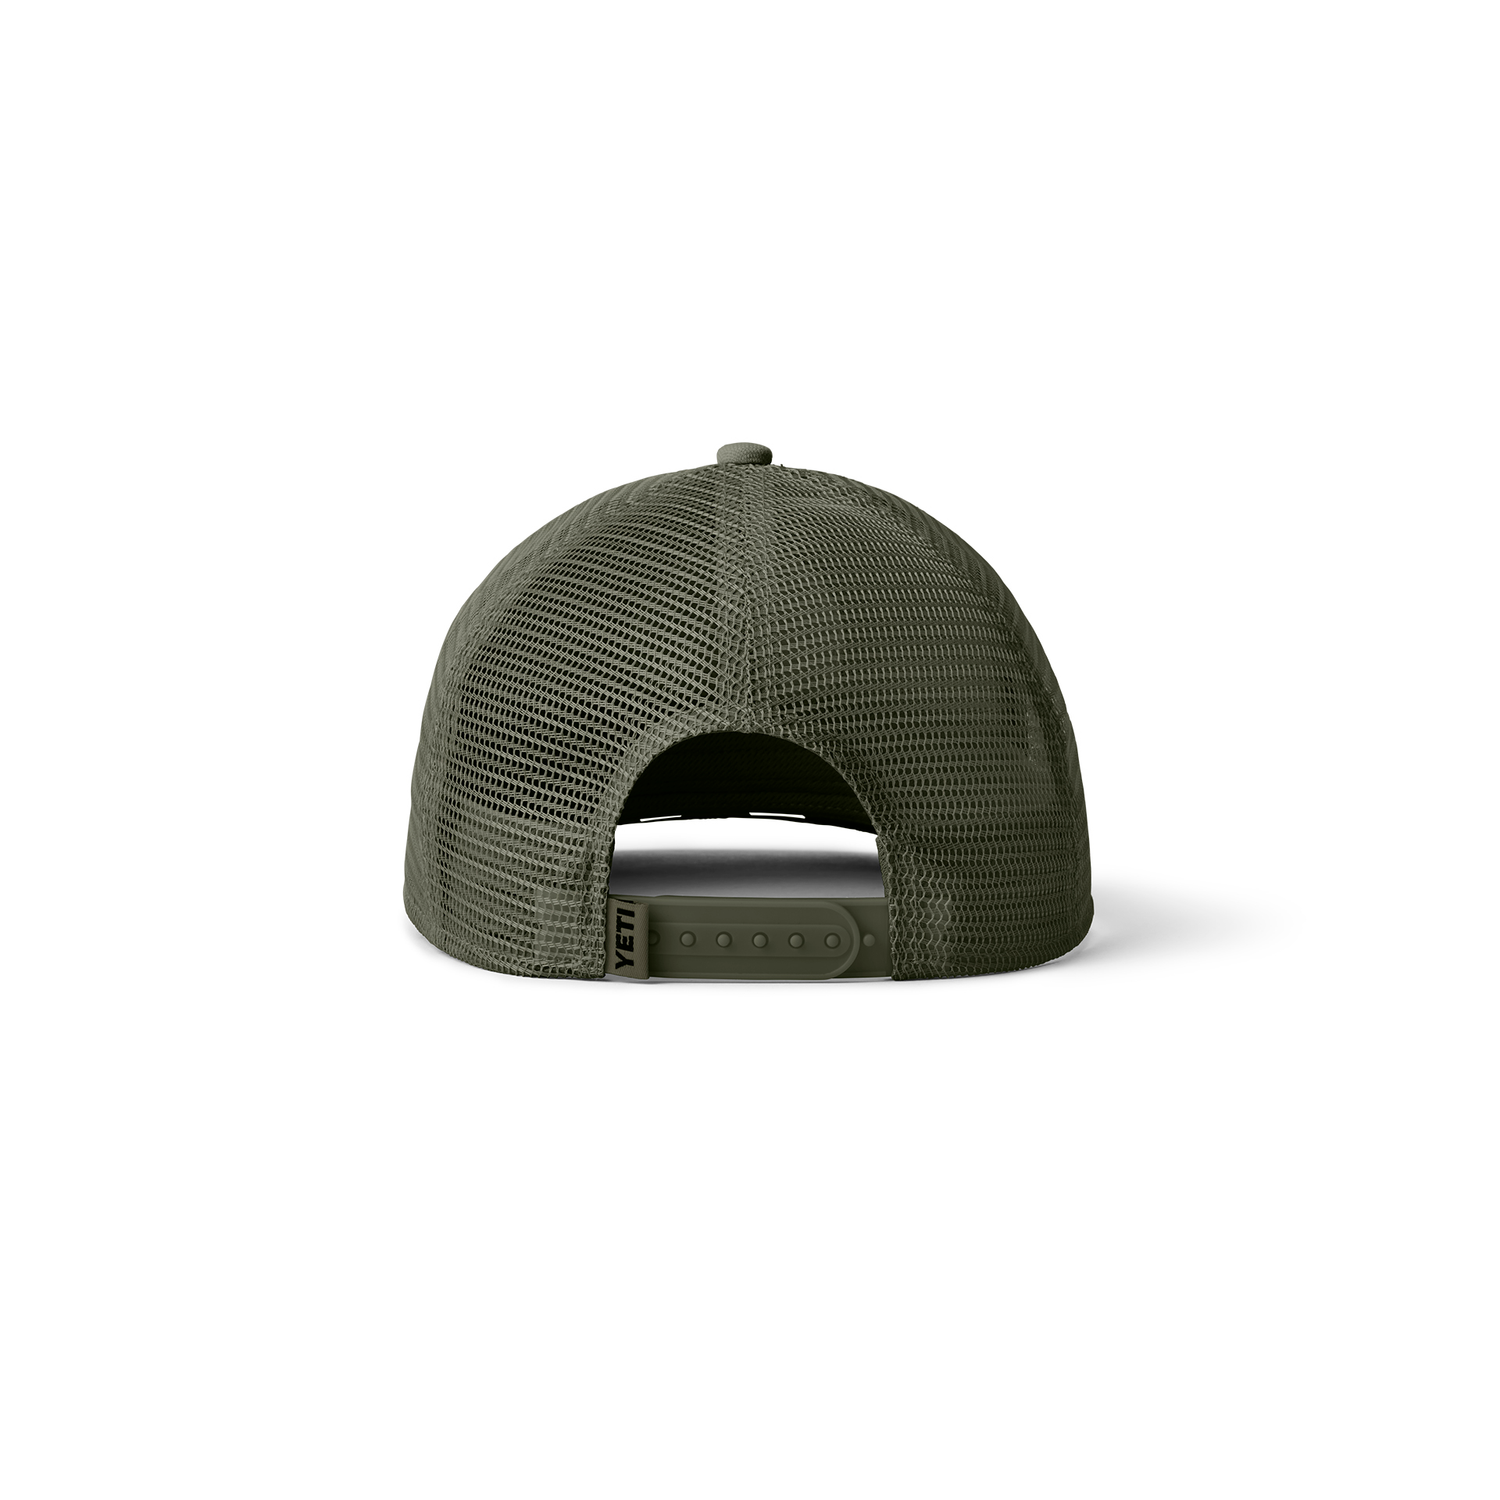 YETI Trapping License Trucker Hat Highlands Olive/Gold